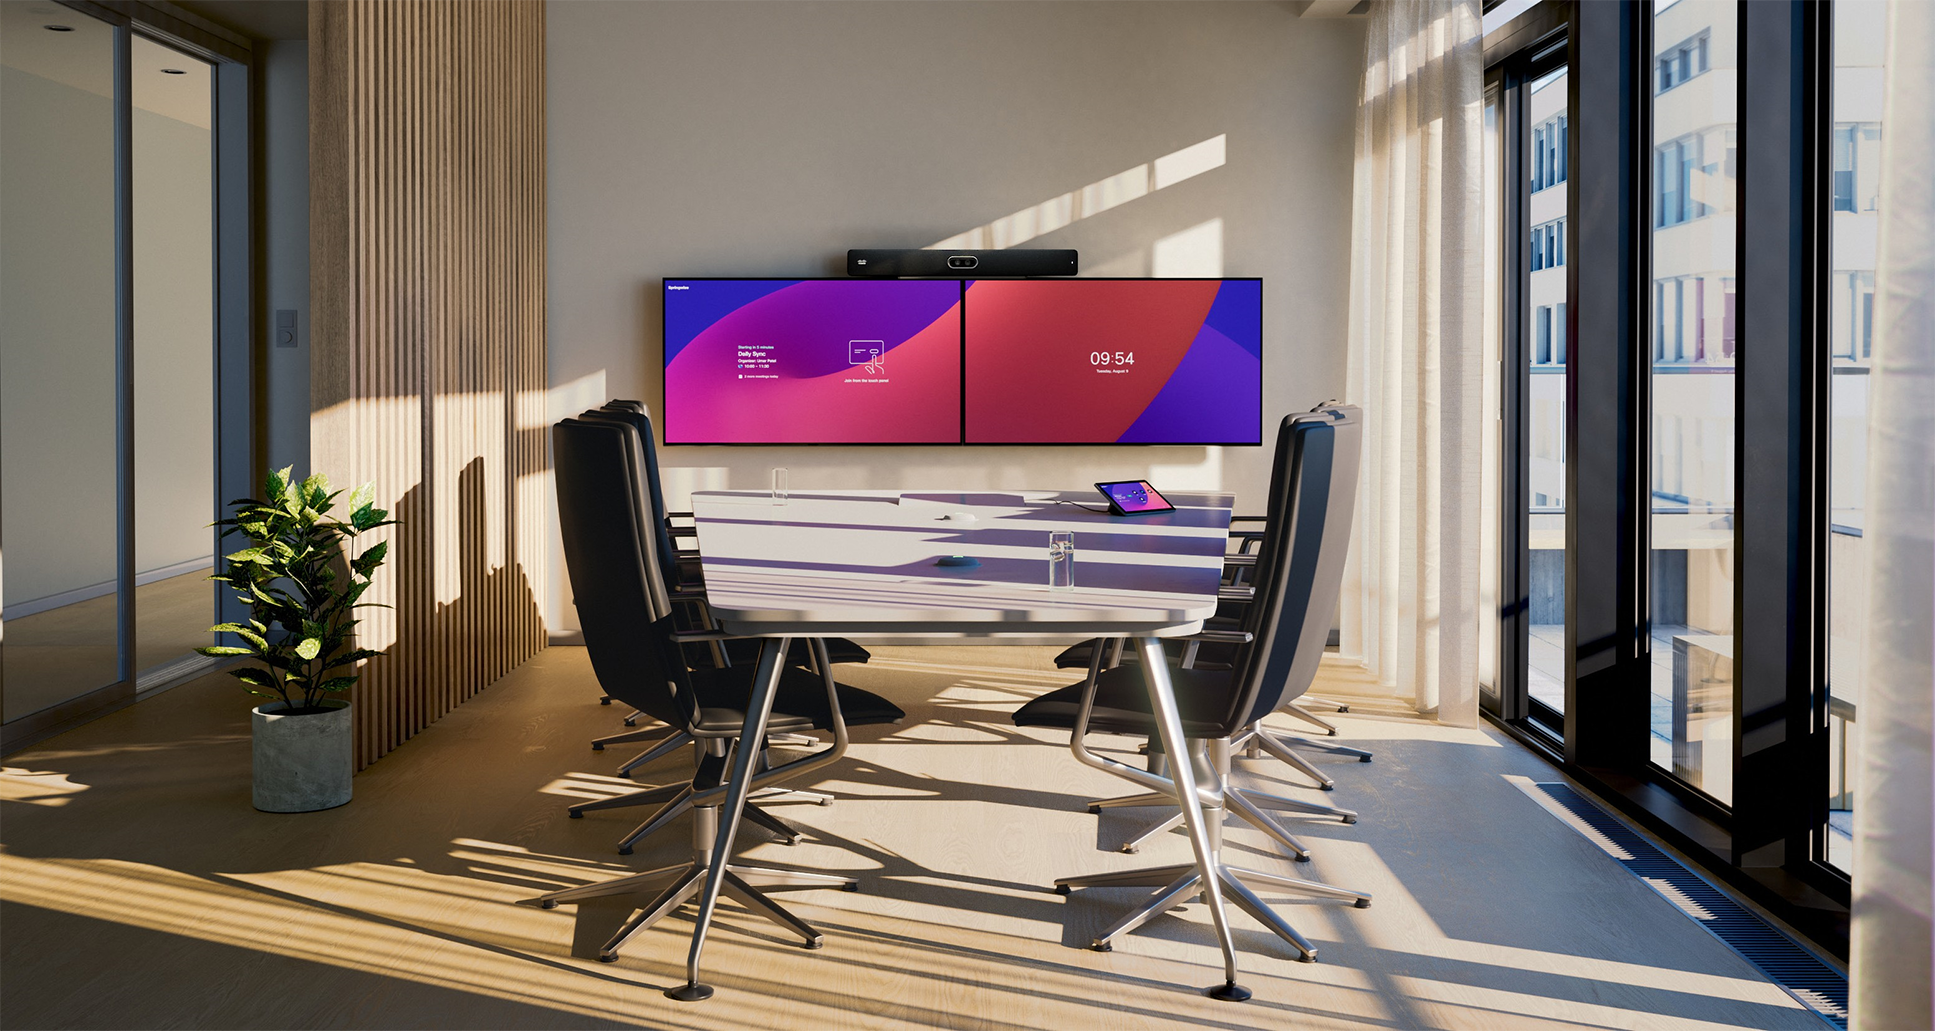 Cisco Room Bar Pro with dual flat screen displays for video conferencing in a medium-sized meeting room